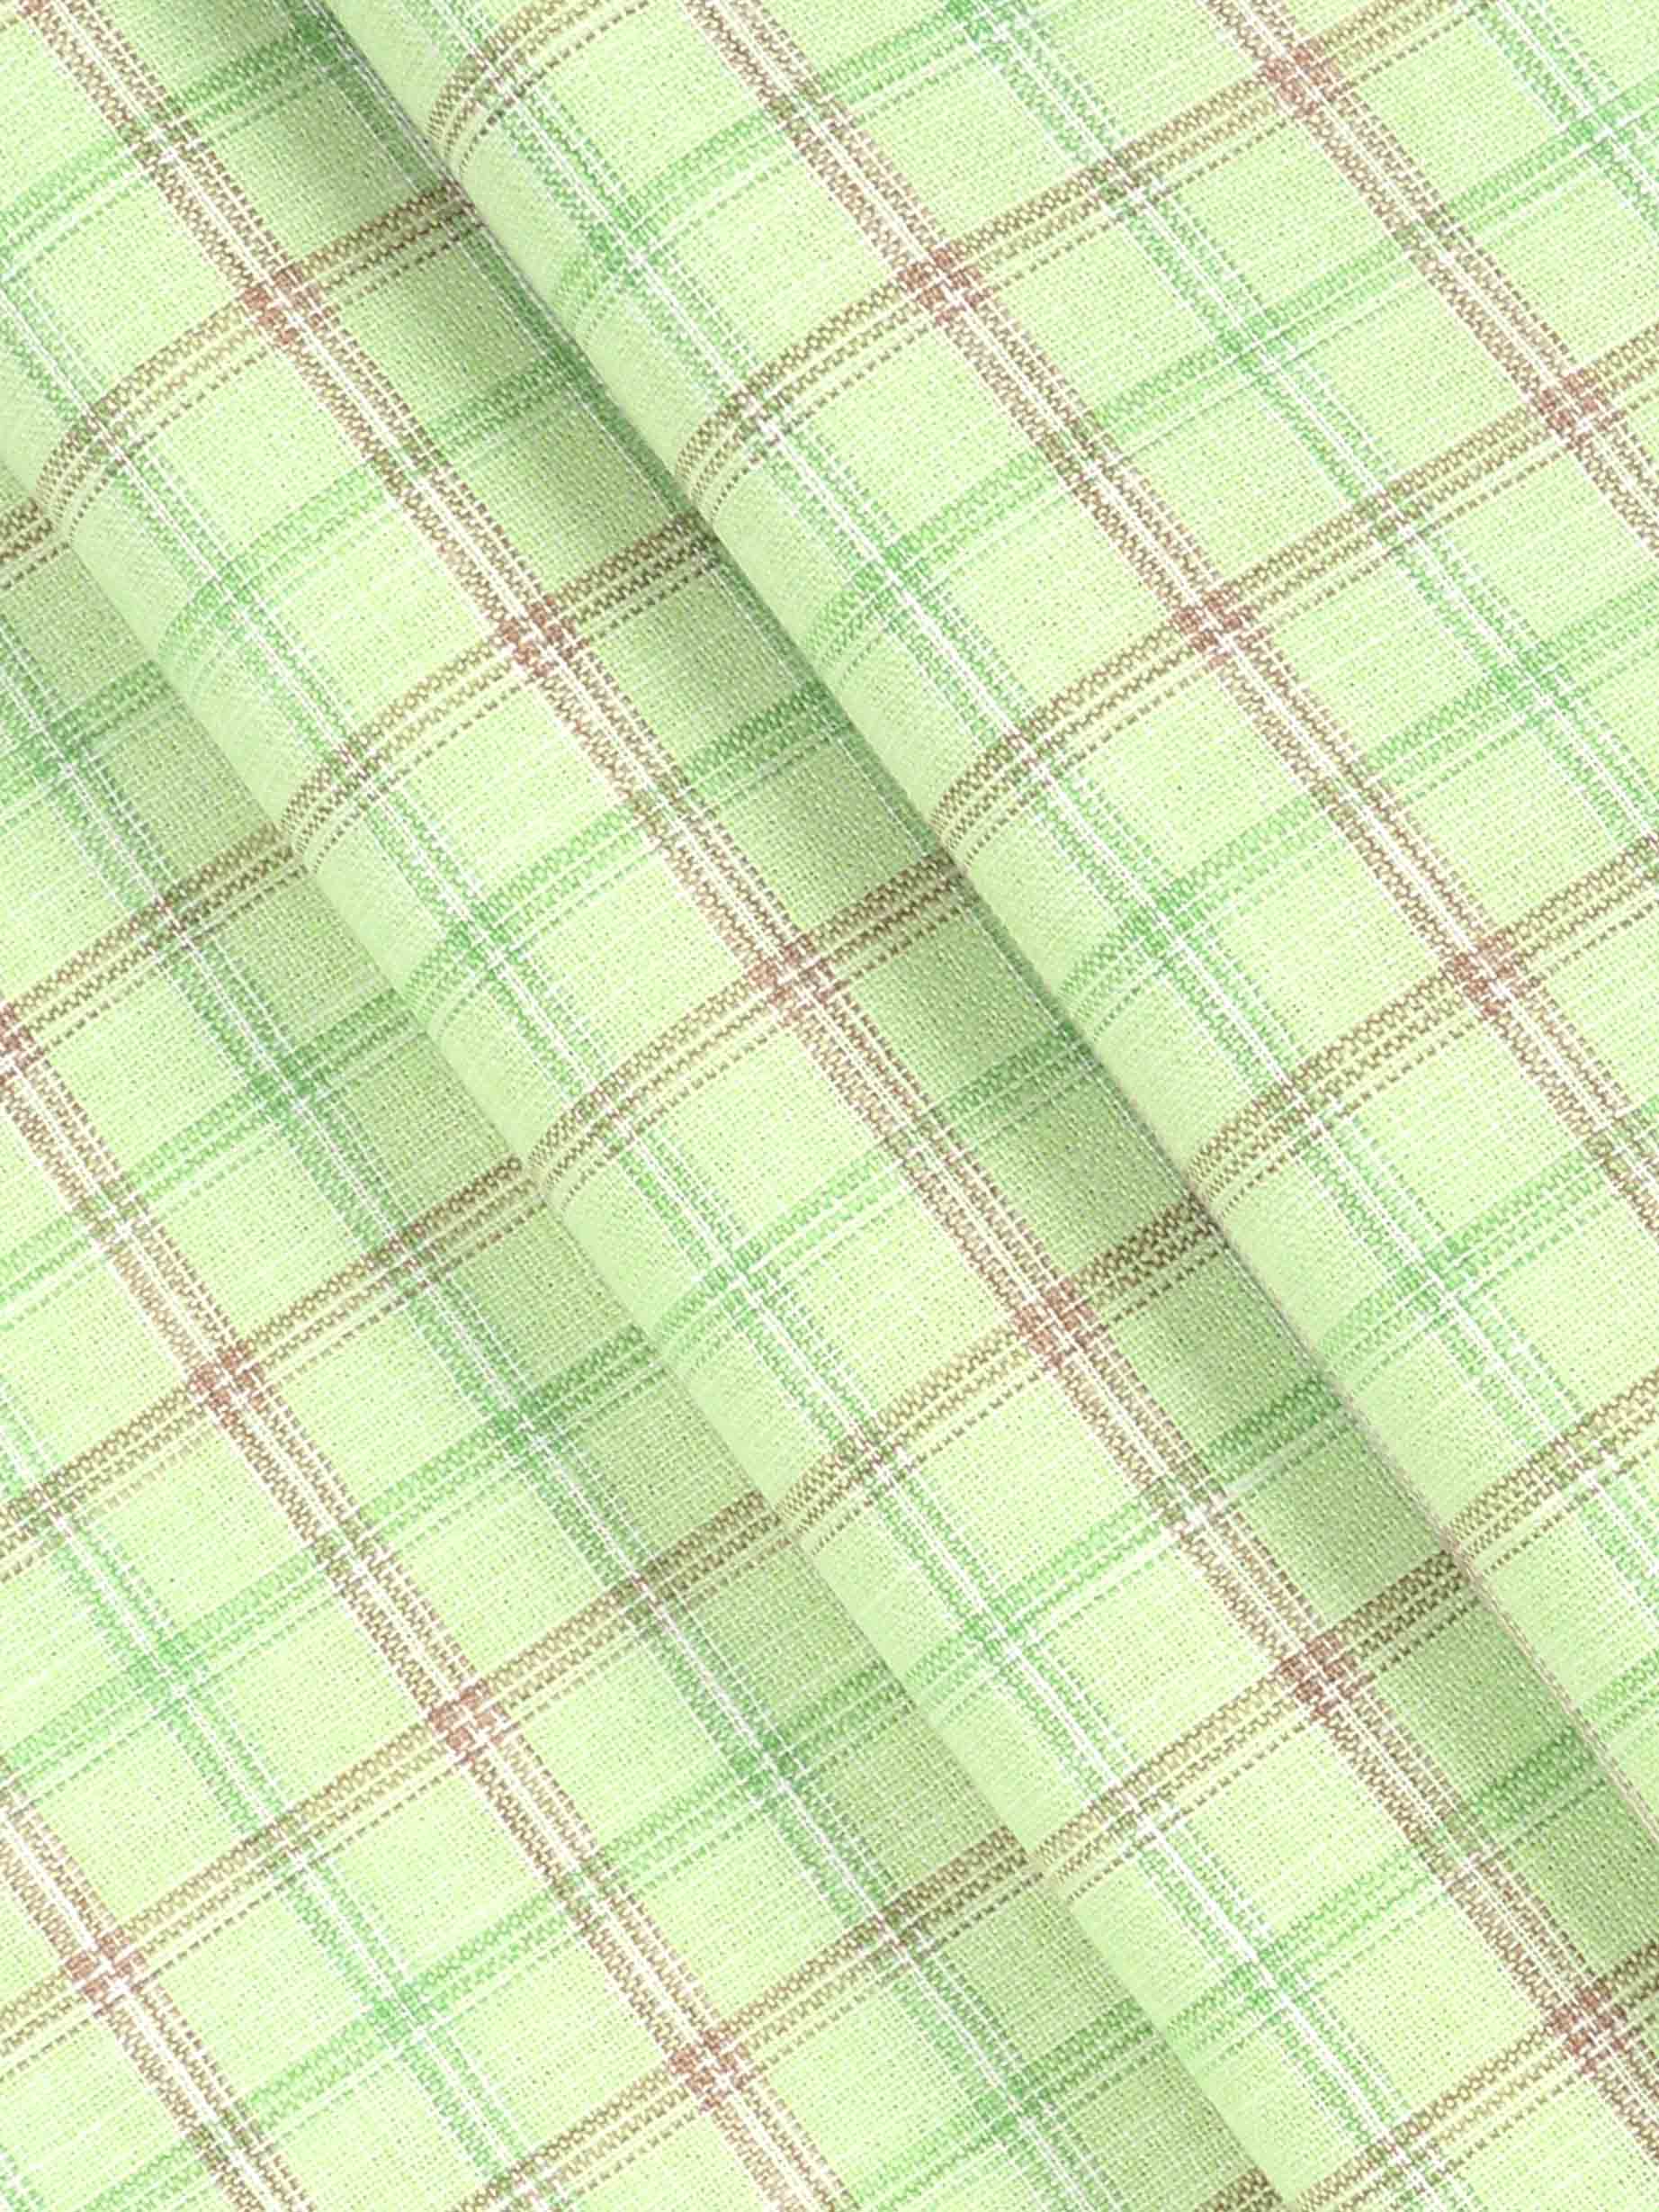 Cotton Colour Check Pista Green Shirting Fabric High Style-Pattern view